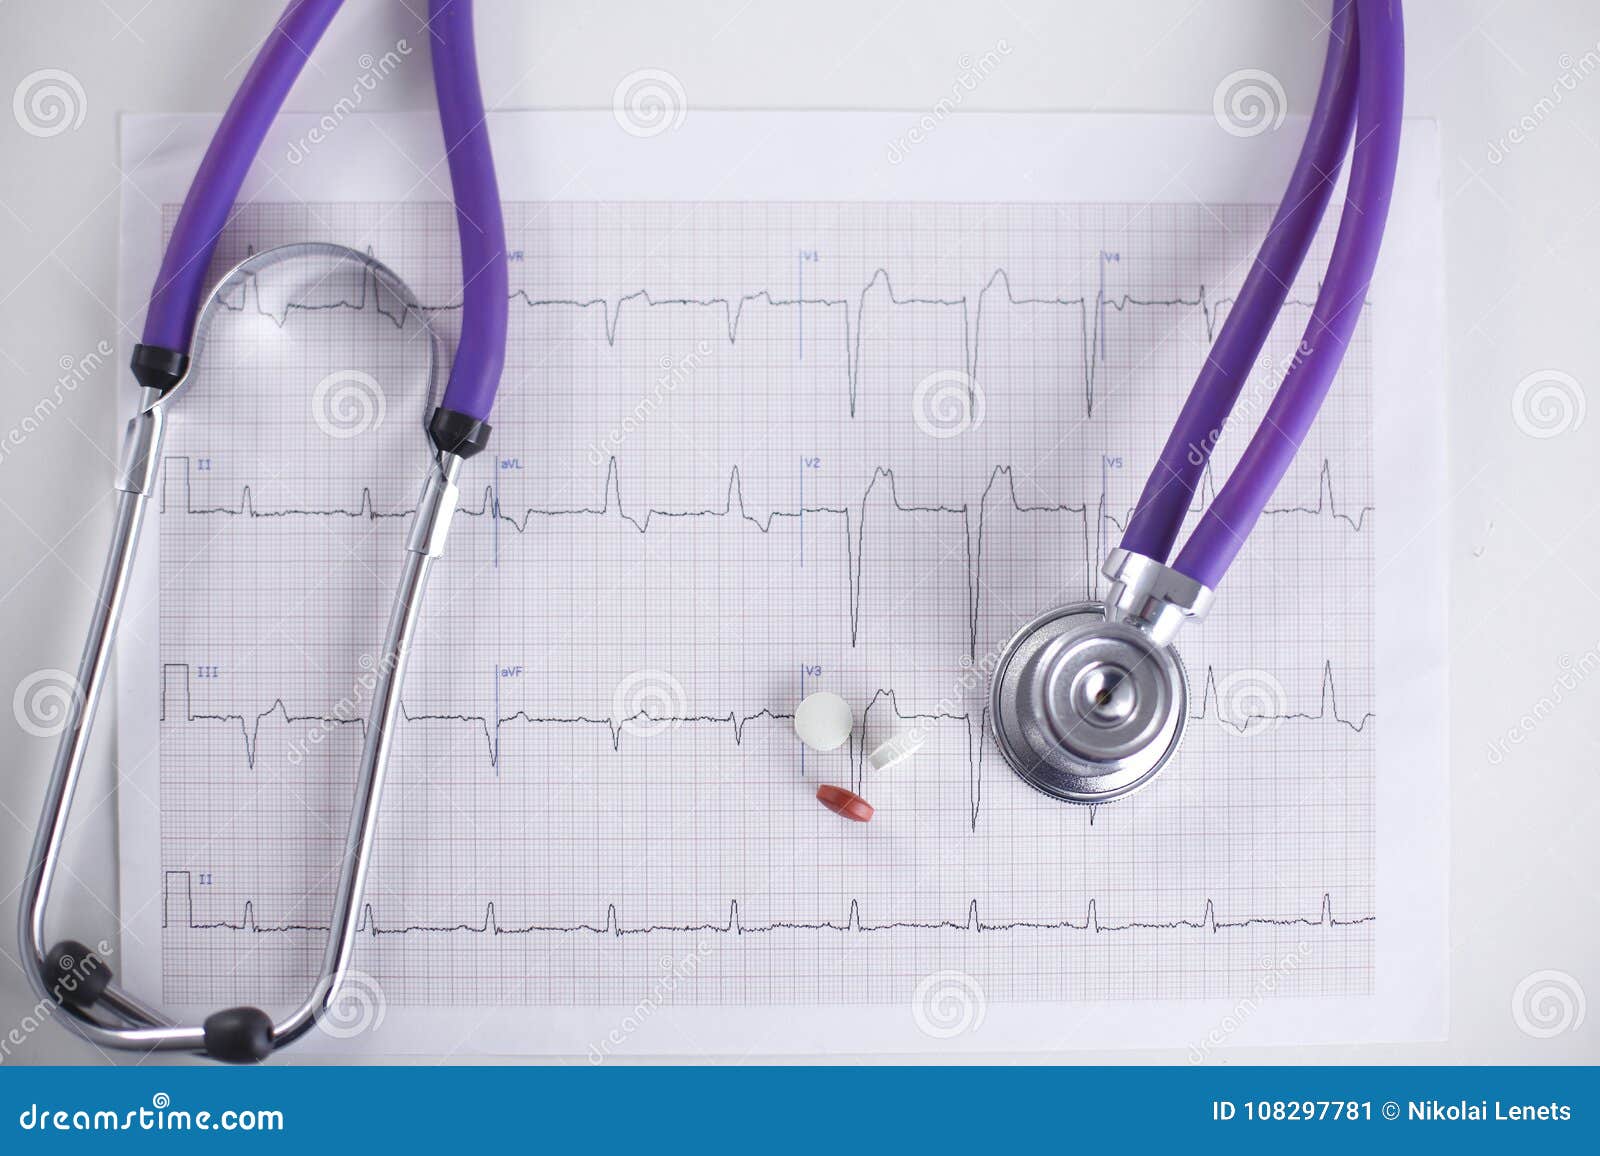 How To Read Cardiogram Chart